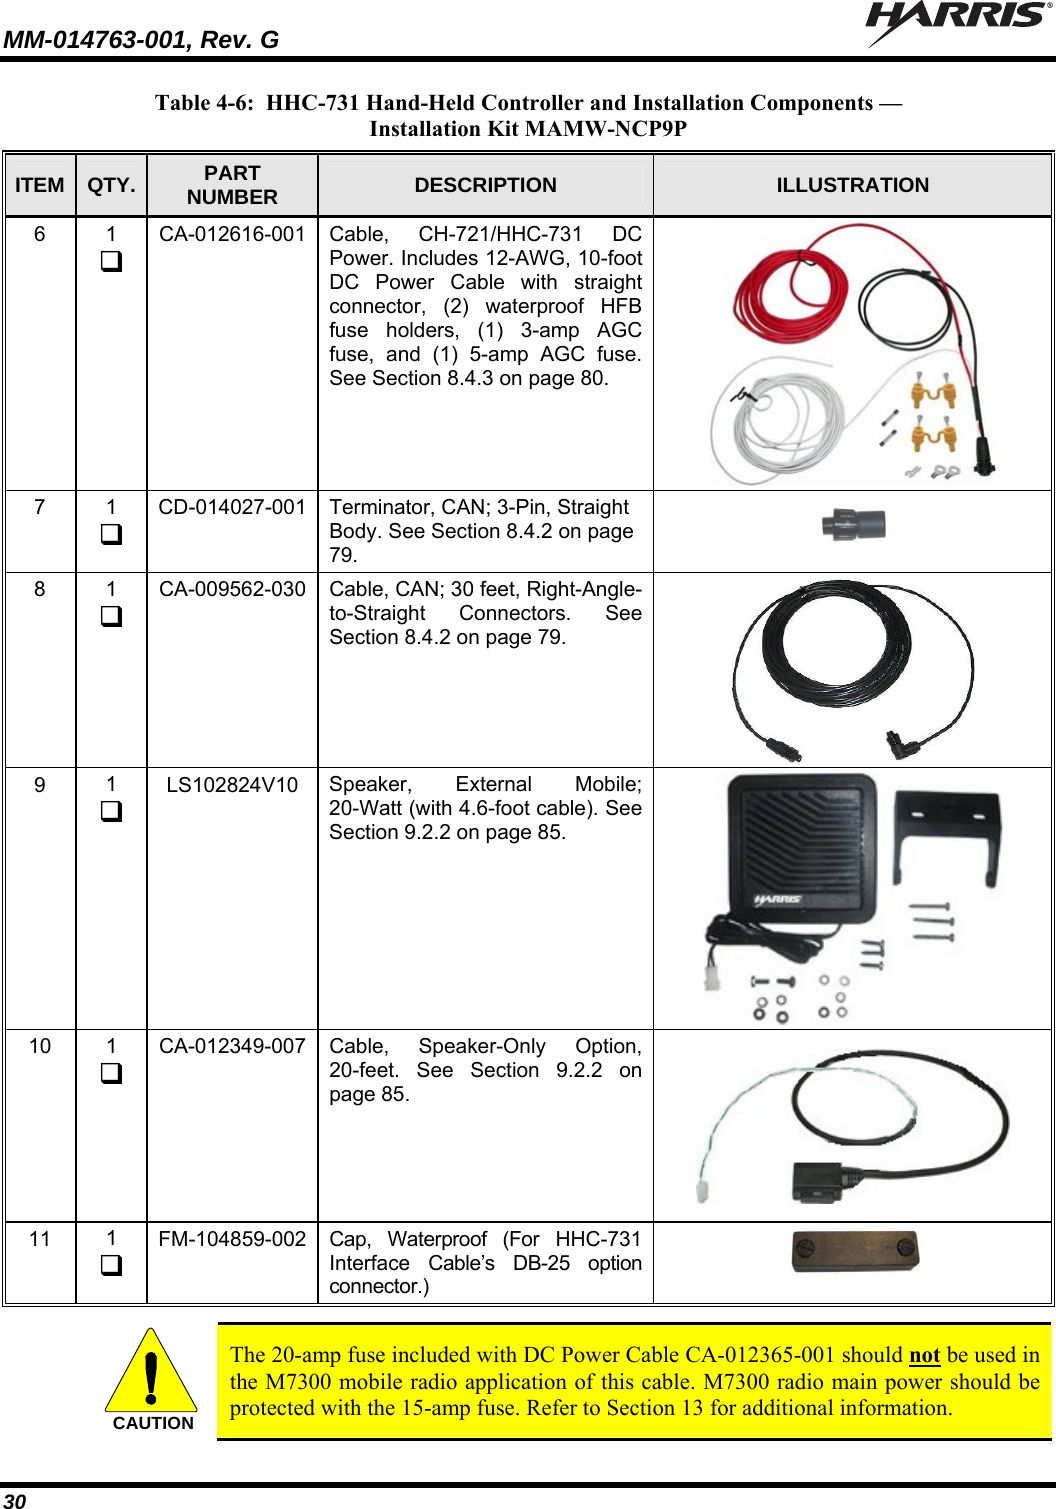 MM-014763-001, Rev. G   30 Table 4-6:  HHC-731 Hand-Held Controller and Installation Components —  Installation Kit MAMW-NCP9P ITEM  QTY.  PART NUMBER  DESCRIPTION  ILLUSTRATION 6  1  CA-012616-001  Cable, CH-721/HHC-731 DC Power. Includes 12-AWG, 10-foot DC Power Cable with straight connector, (2) waterproof HFB fuse holders, (1) 3-amp AGC fuse, and (1) 5-amp AGC fuse. See Section 8.4.3 on page 80.  7  1  CD-014027-001  Terminator, CAN; 3-Pin, Straight Body. See Section 8.4.2 on page 79.     8  1  CA-009562-030  Cable, CAN; 30 feet, Right-Angle-to-Straight Connectors. See Section 8.4.2 on page 79.  9  1  LS102824V10  Speaker, External Mobile; 20-Watt (with 4.6-foot cable). See Section 9.2.2 on page 85.  10  1  CA-012349-007  Cable, Speaker-Only Option, 20-feet. See Section 9.2.2 on page 85.  11  1  FM-104859-002  Cap, Waterproof (For HHC-731 Interface Cable’s DB-25 option connector.)    CAUTION  The 20-amp fuse included with DC Power Cable CA-012365-001 should not be used in the M7300 mobile radio application of this cable. M7300 radio main power should be protected with the 15-amp fuse. Refer to Section 13 for additional information.  